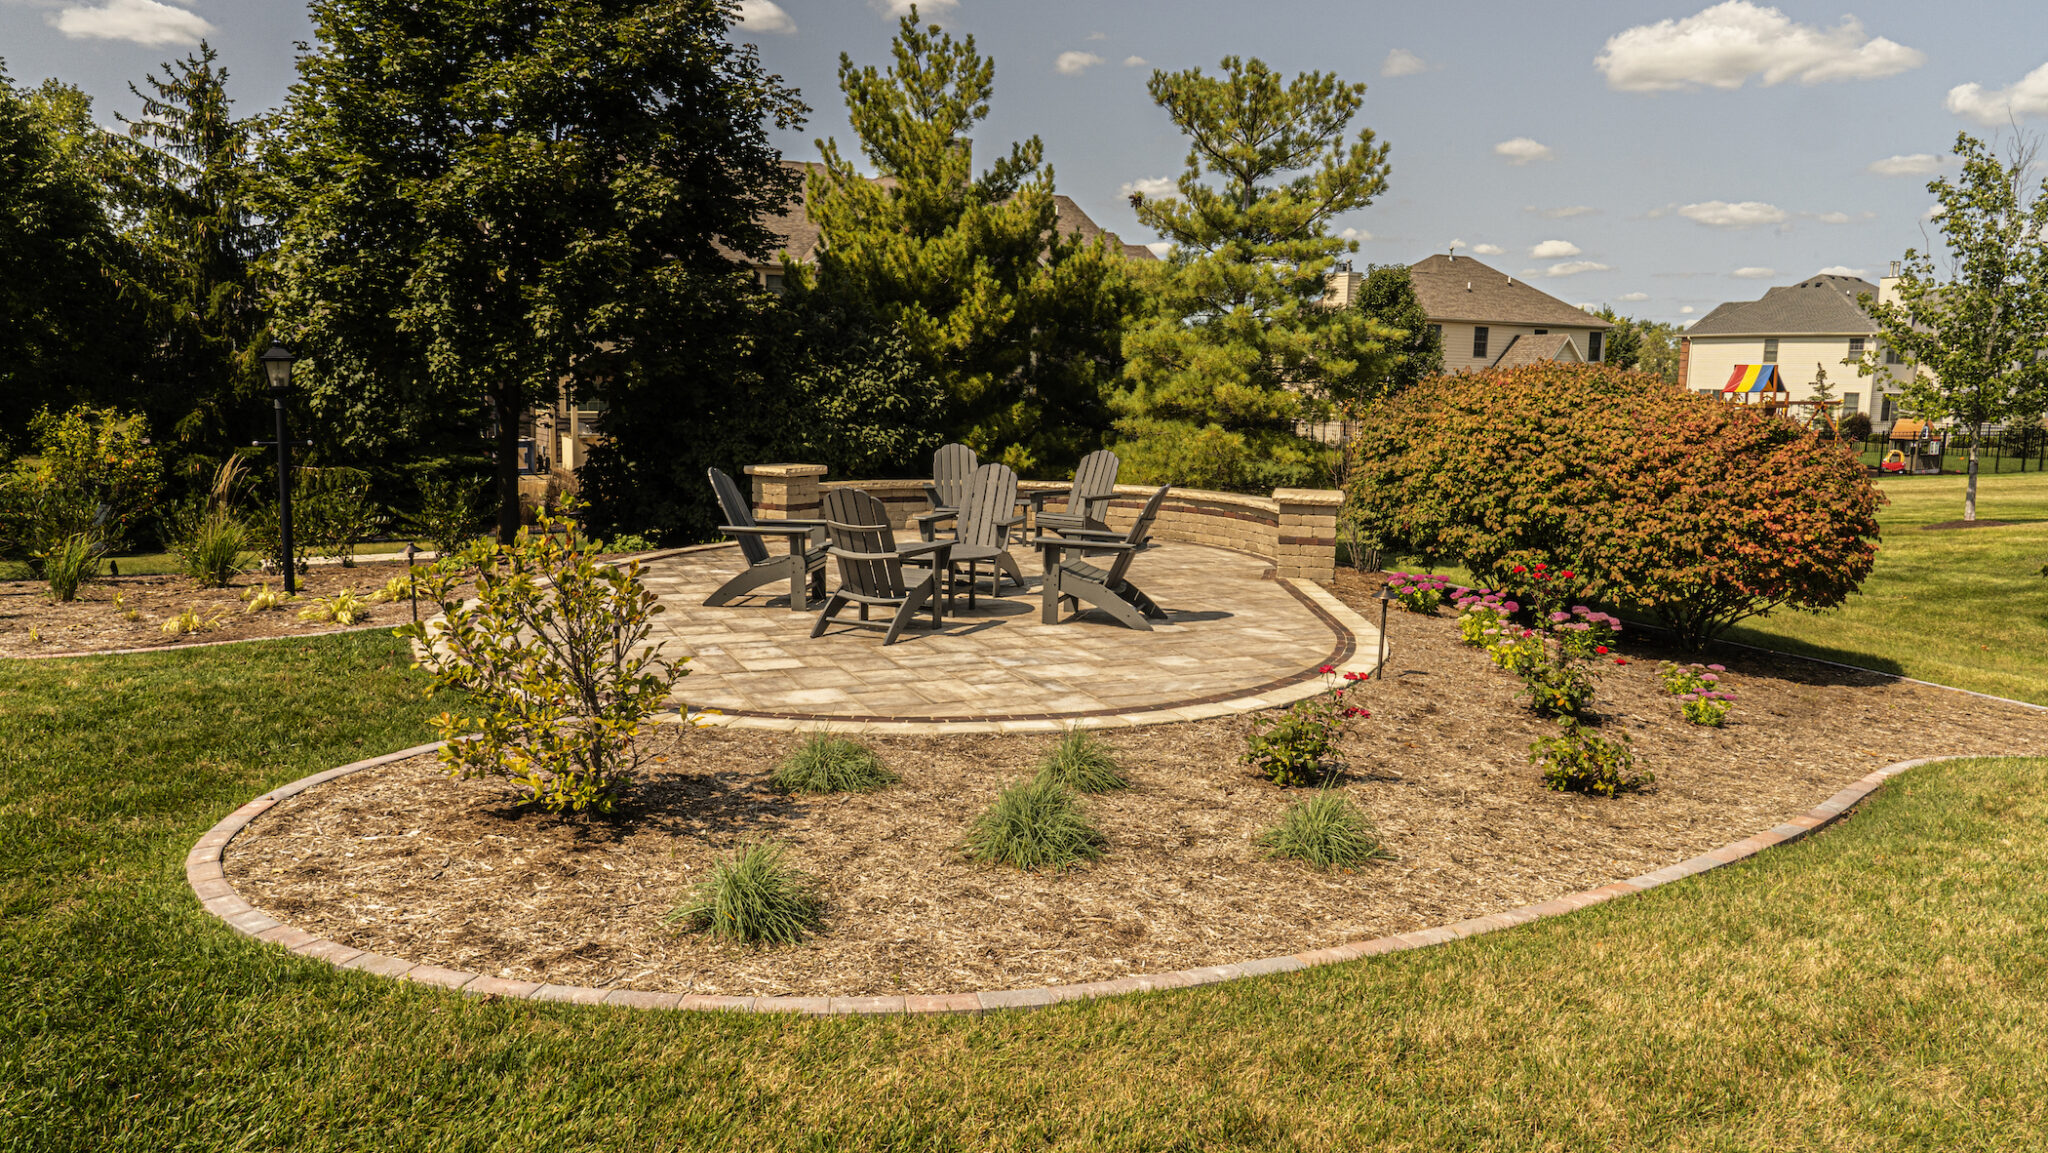 Hardscaping F W Lawn Care Landscaping, Landscaping Champaign Il